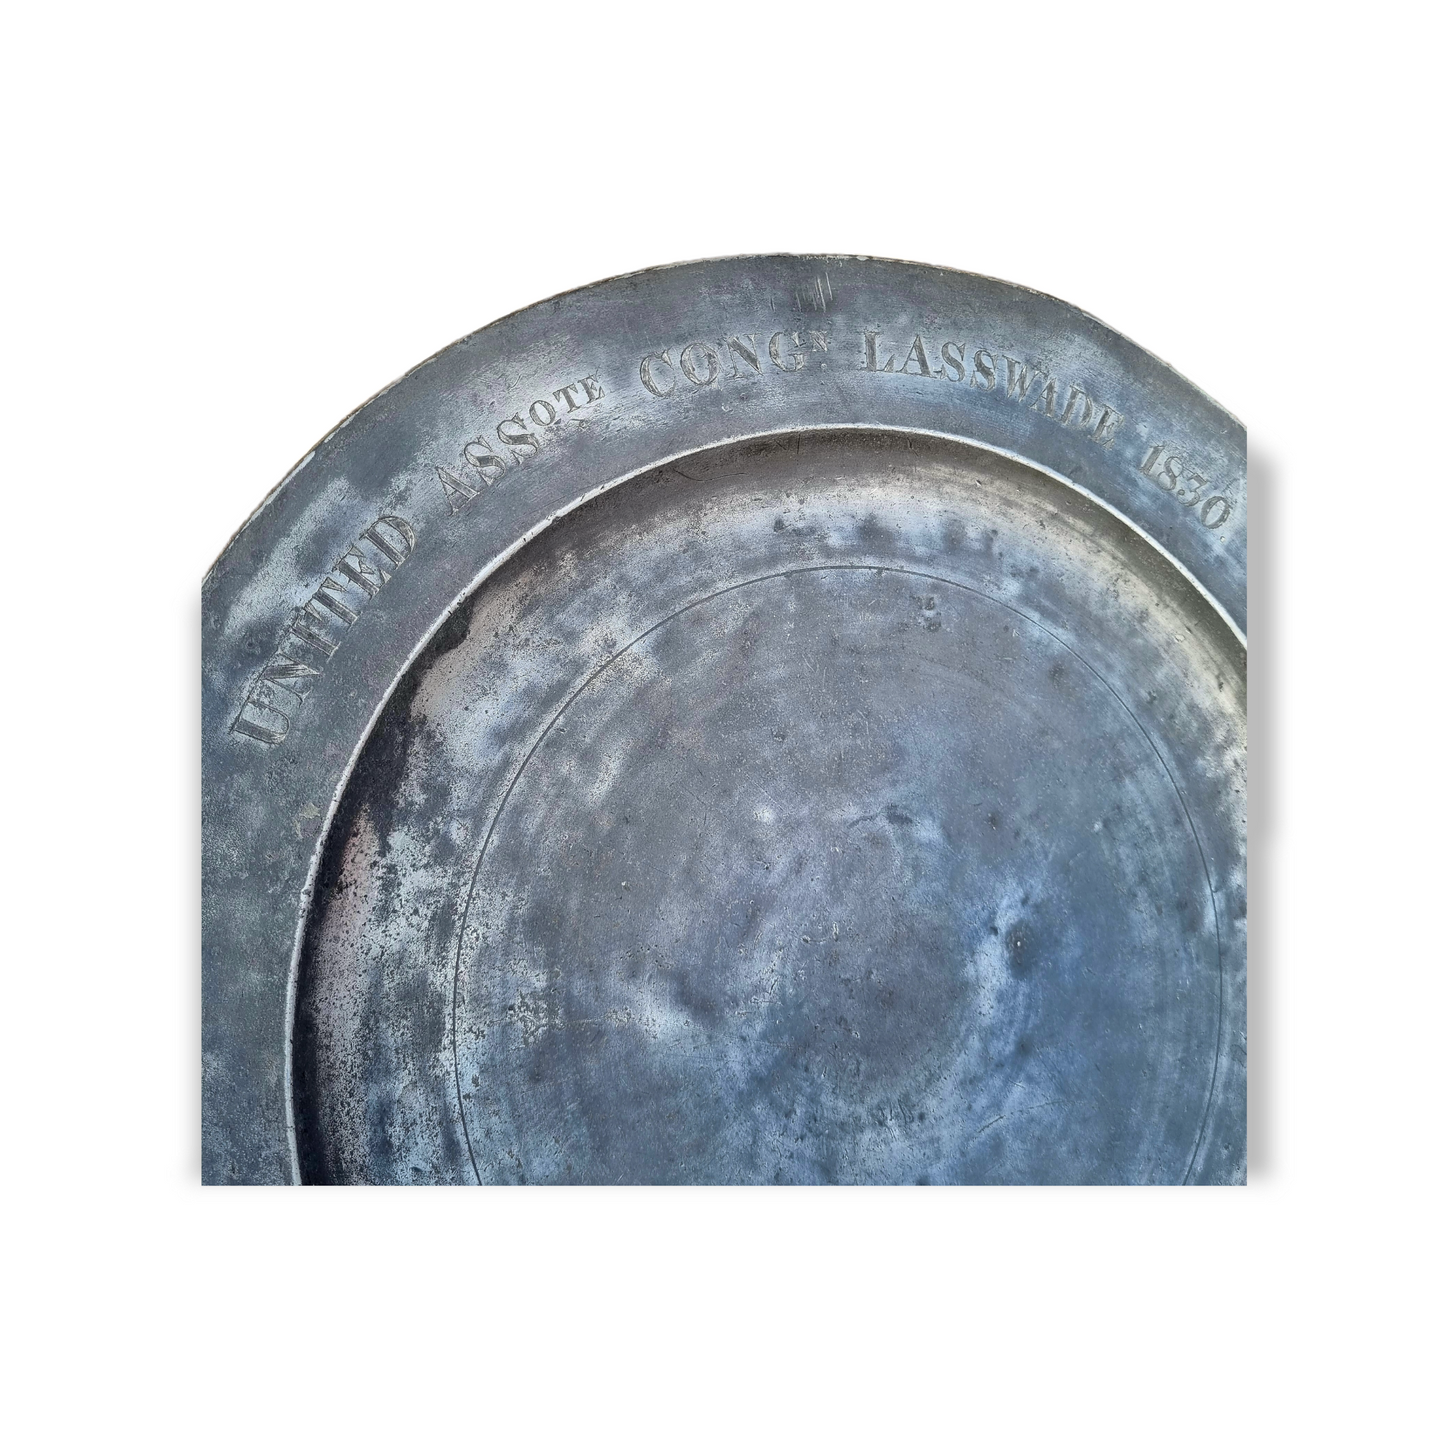 Robert Kinniburgh of Edinburgh - Early 19th Century Scottish Antique Pewter Charger Inscribed "United Assote Congn Lasswade 1830"